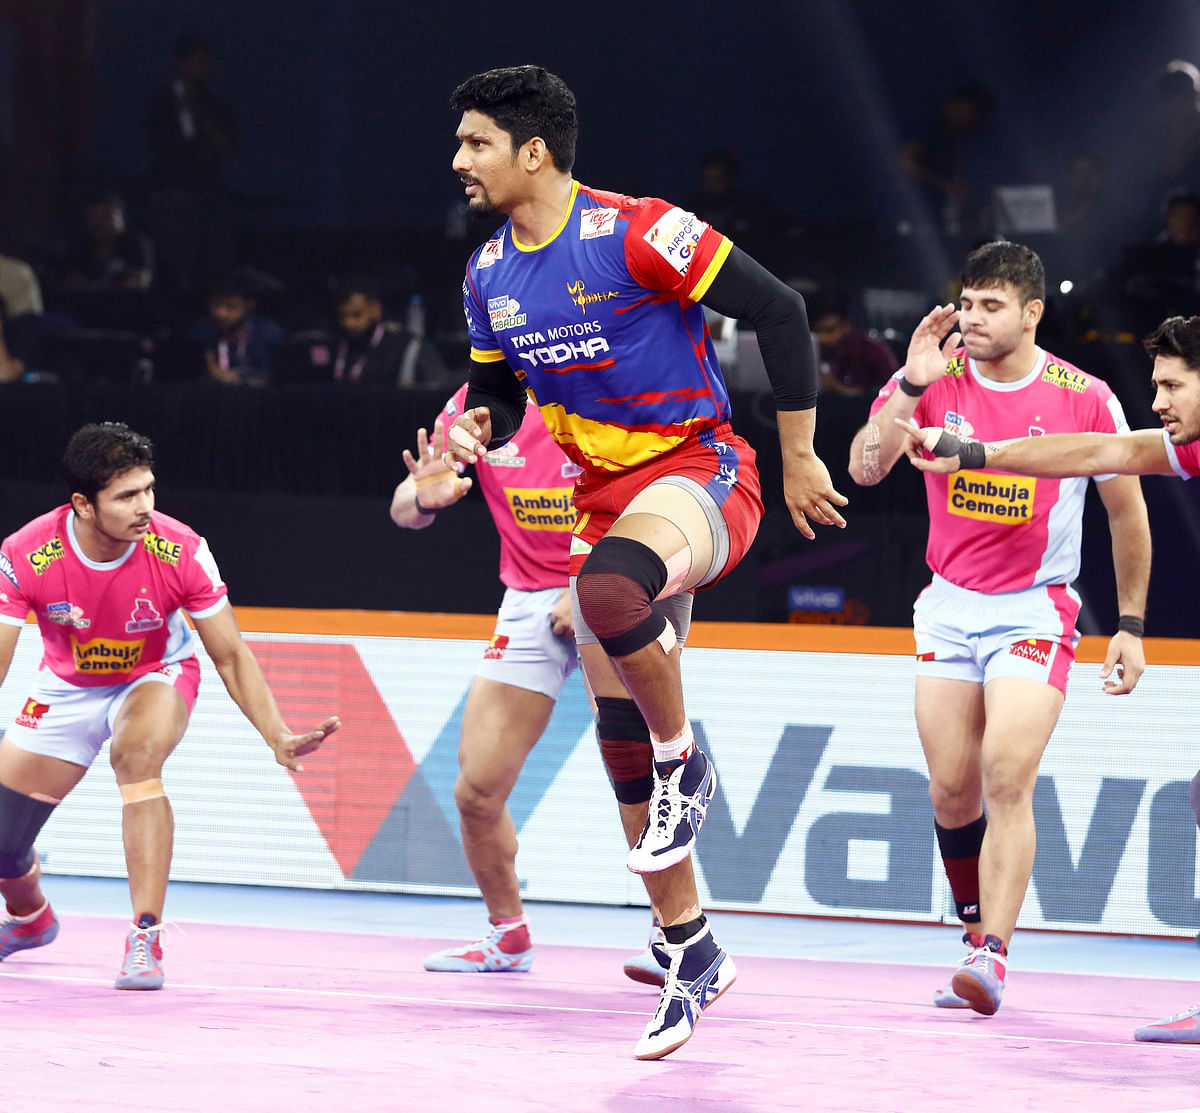 UP Yoddha produced a clinical performance to beat Jaipur Pink Panthers 38-32 in their Pro Kabaddi League match